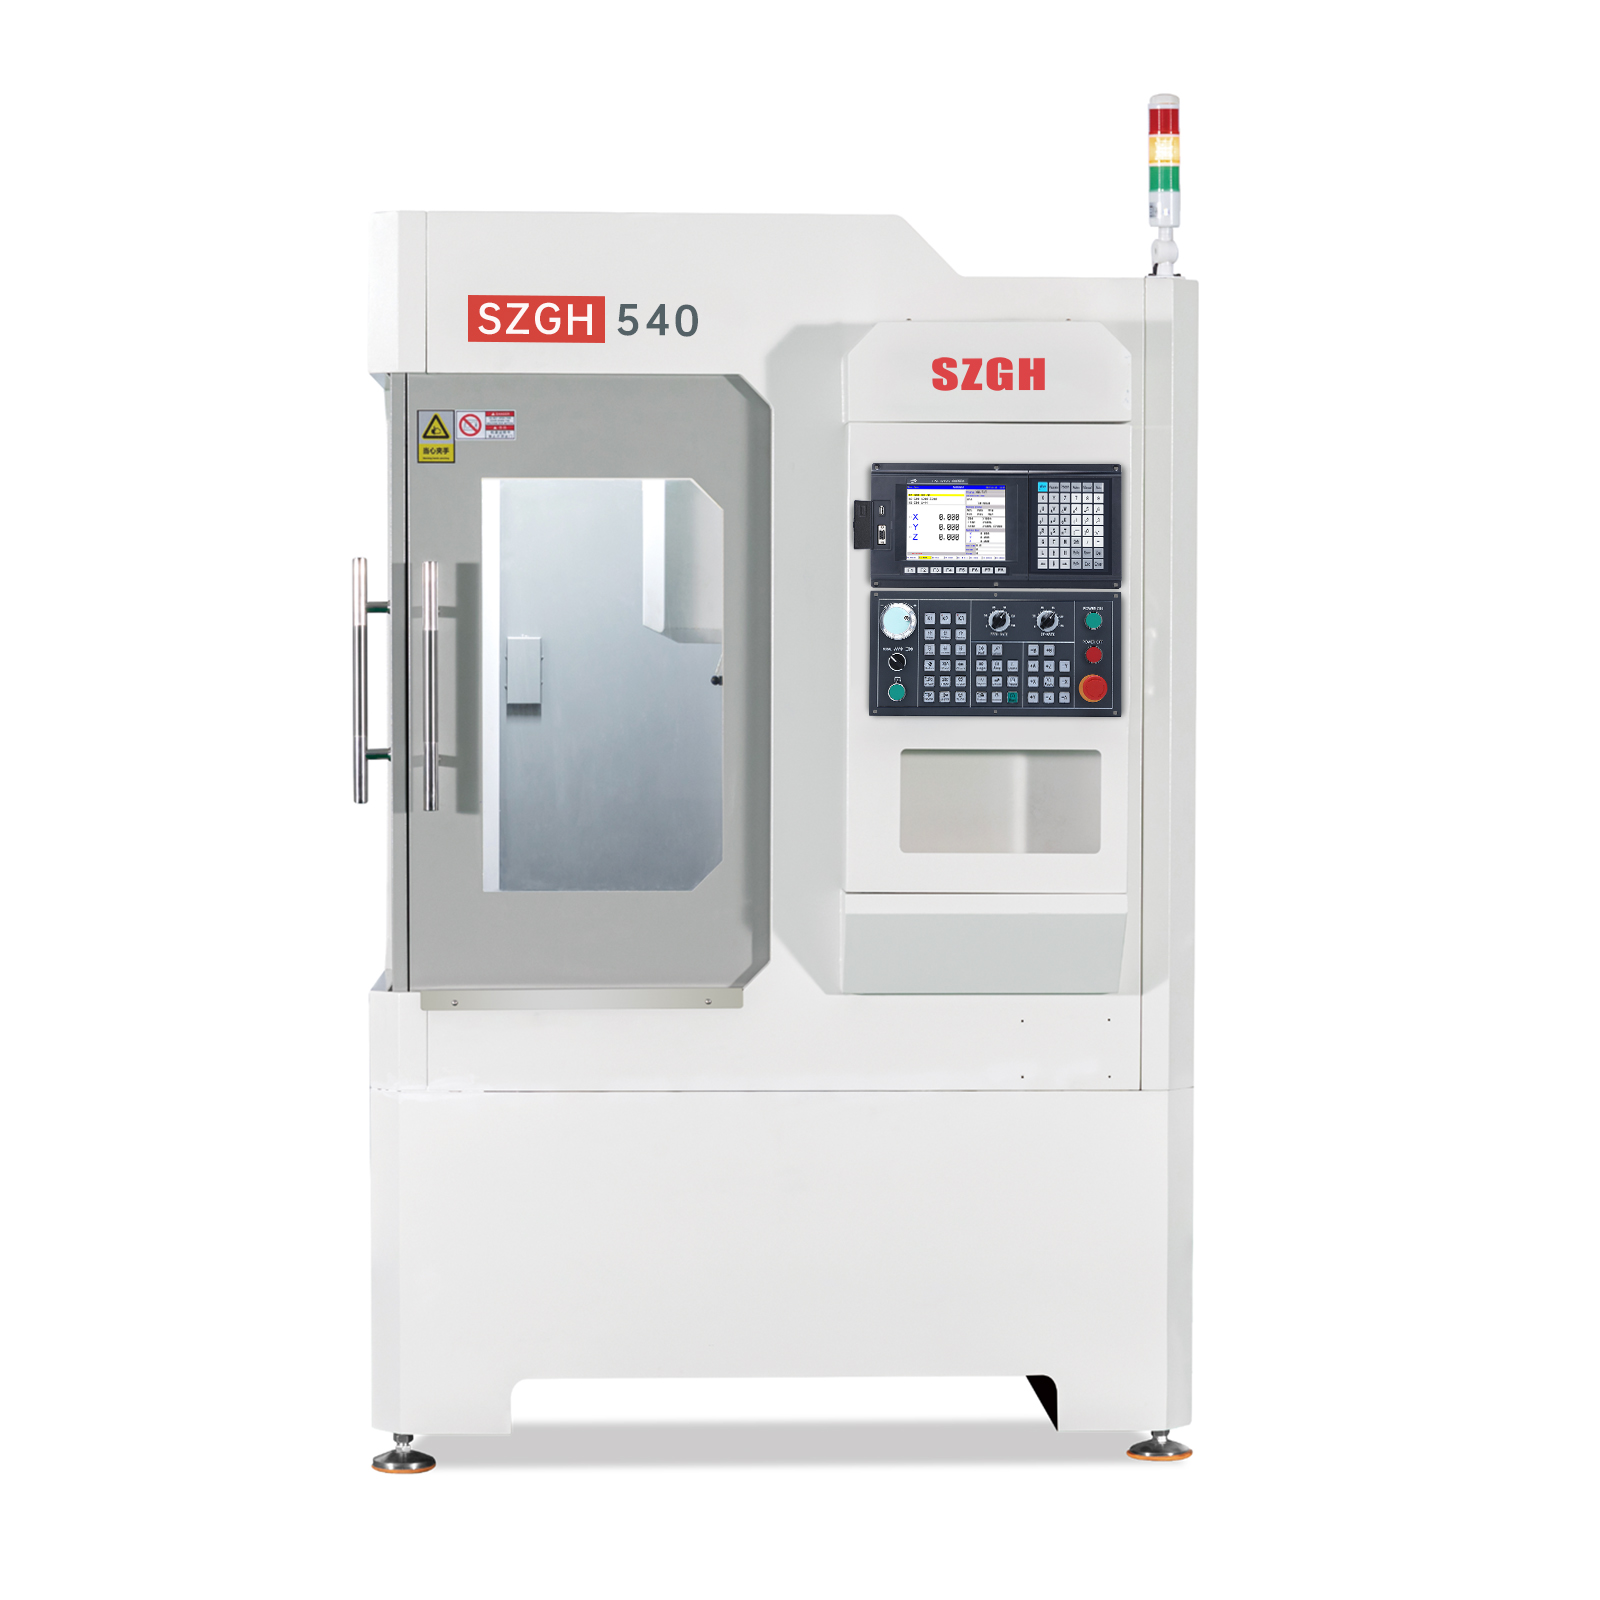 SZGH 3 Axis Milling Machine with 4.5KW Spindle Motor 8 Station Tool Magazine